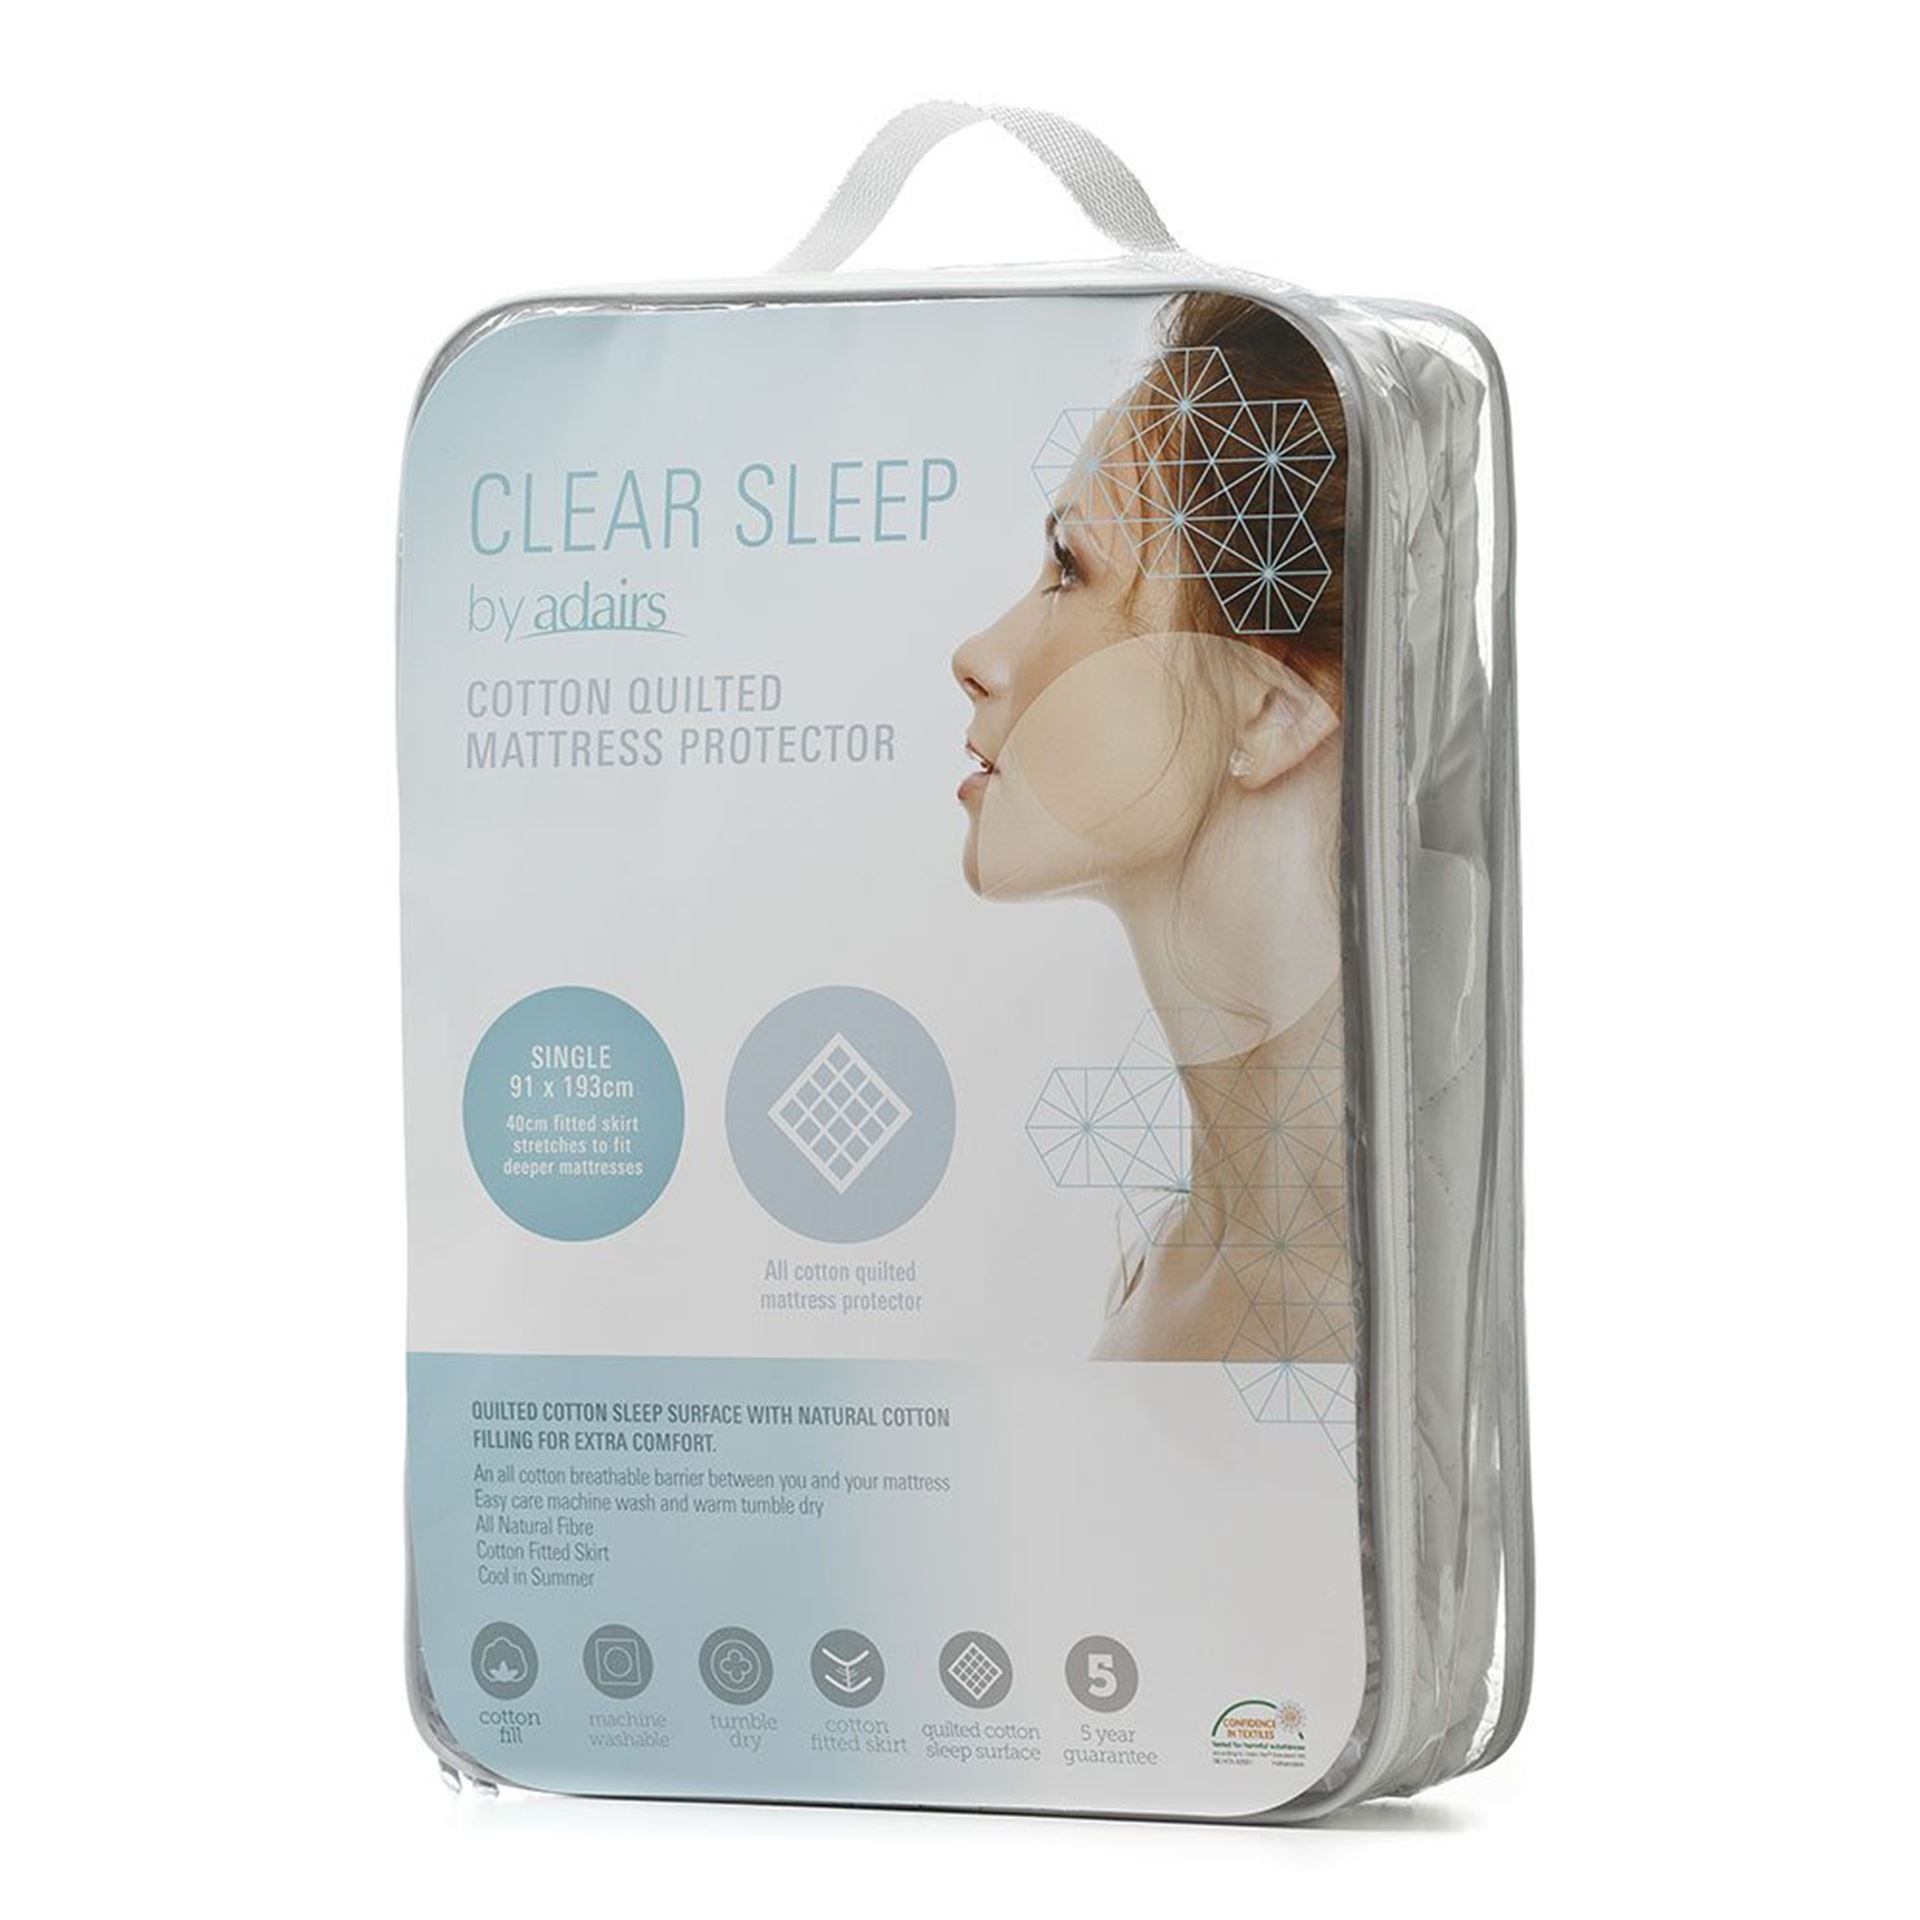 Clear Sleep - Cotton Quilted Mattress Protector - Bedroom Mattress